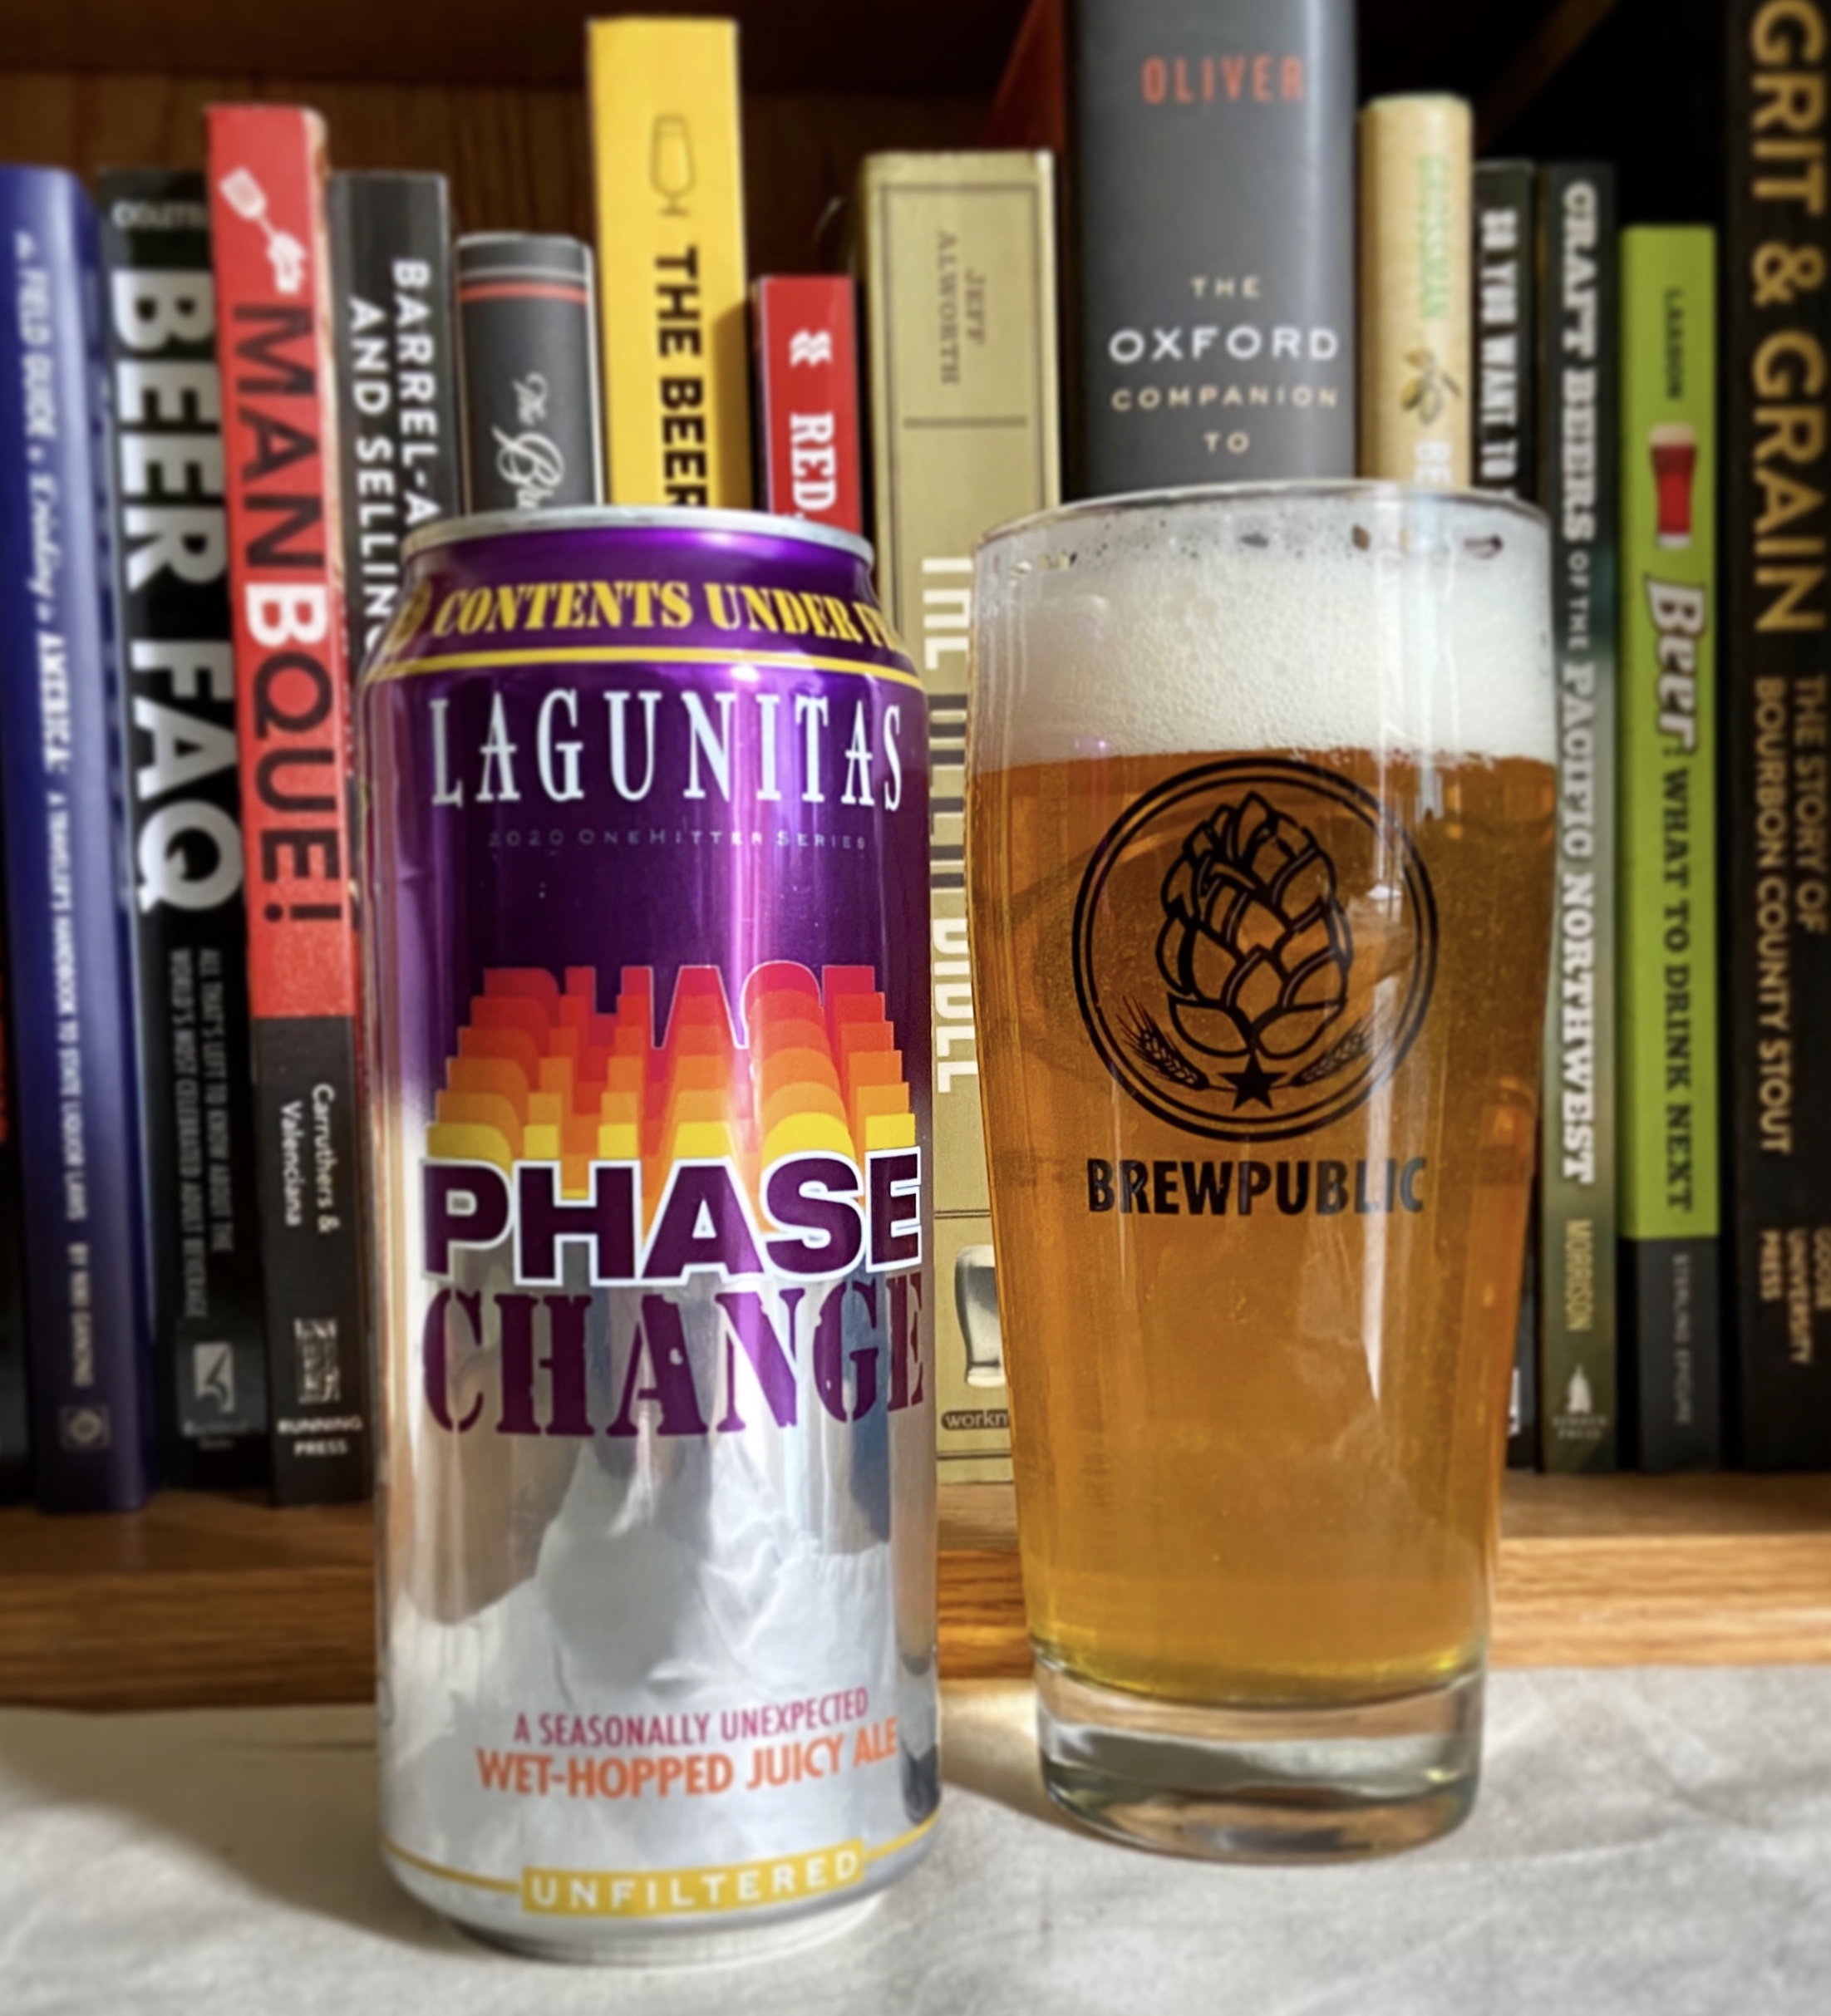 Lagunitas Brewing returns with its Phase Change - Wet-Hopped Juicy Ale but in 16oz cans for this year's release.